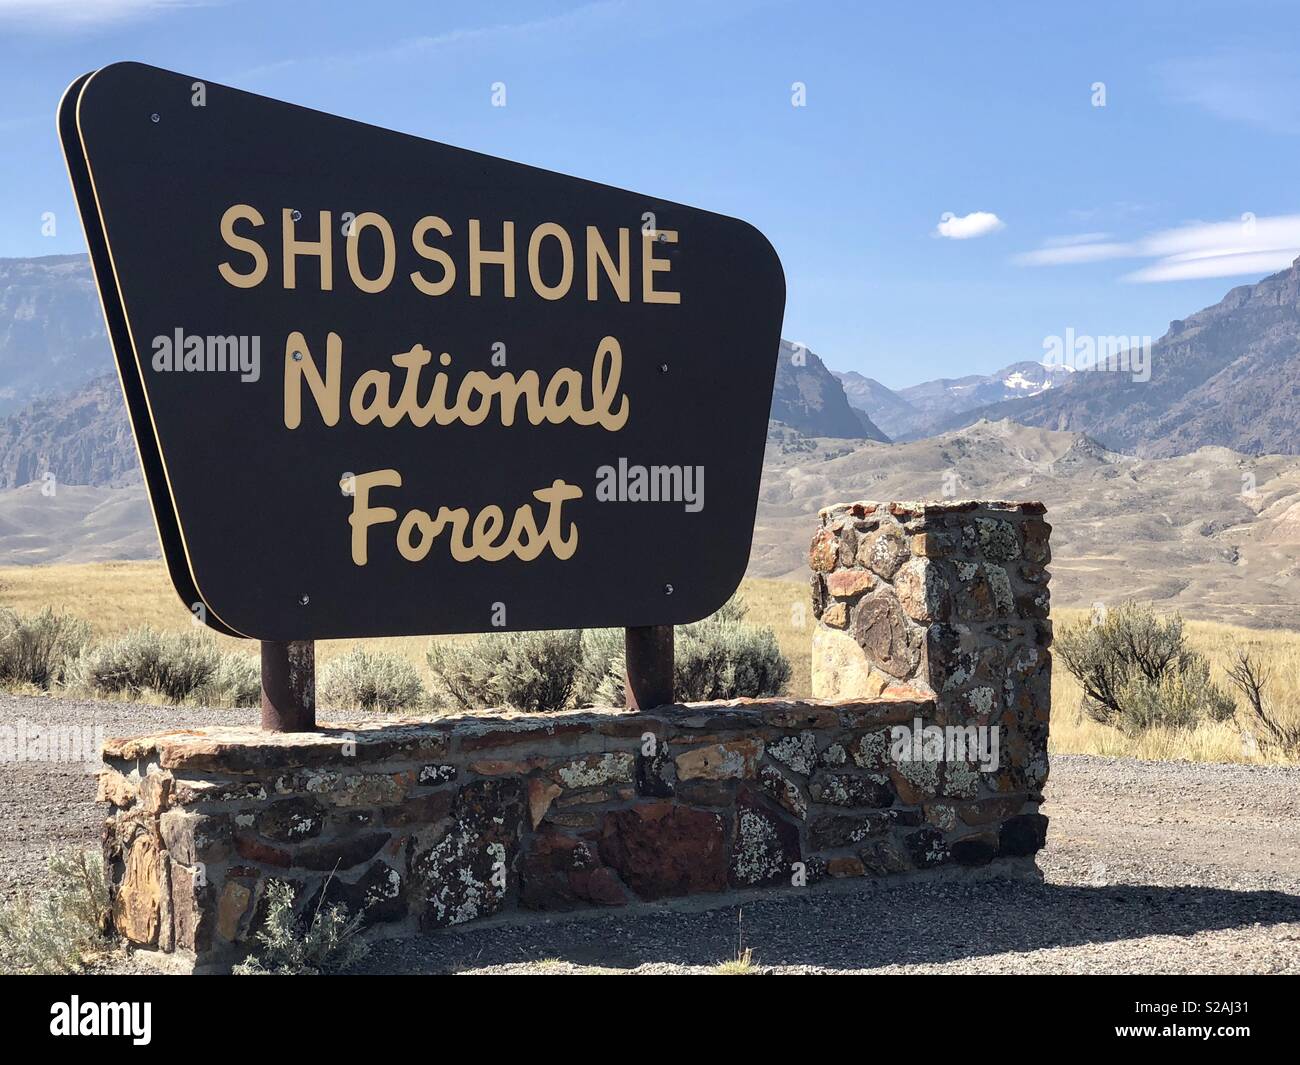 Shoshone National Forest Boundary, South Fork of the Shoshone River Near Cody, Wyoming. Entering Sign Stock Photo